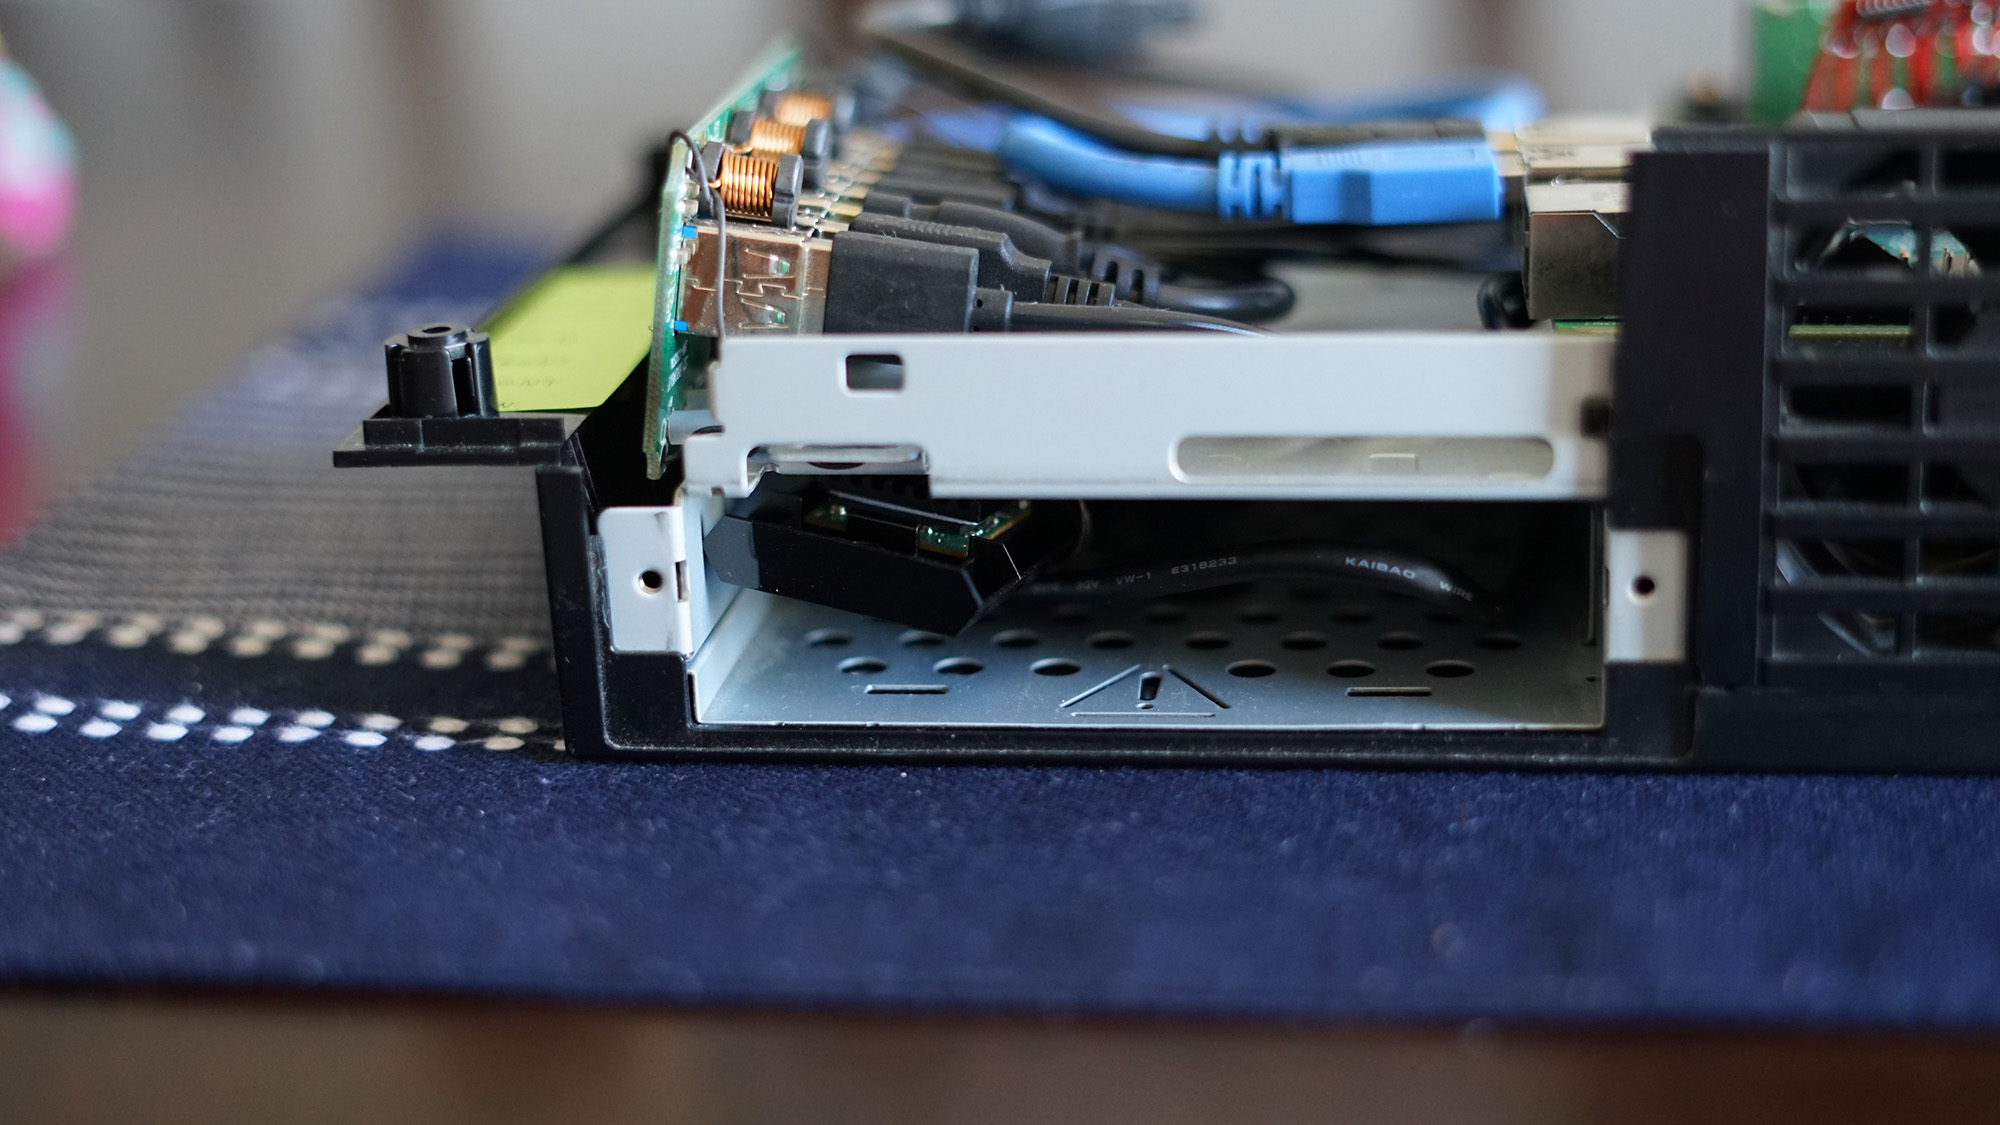 Bottom of chassis SSD